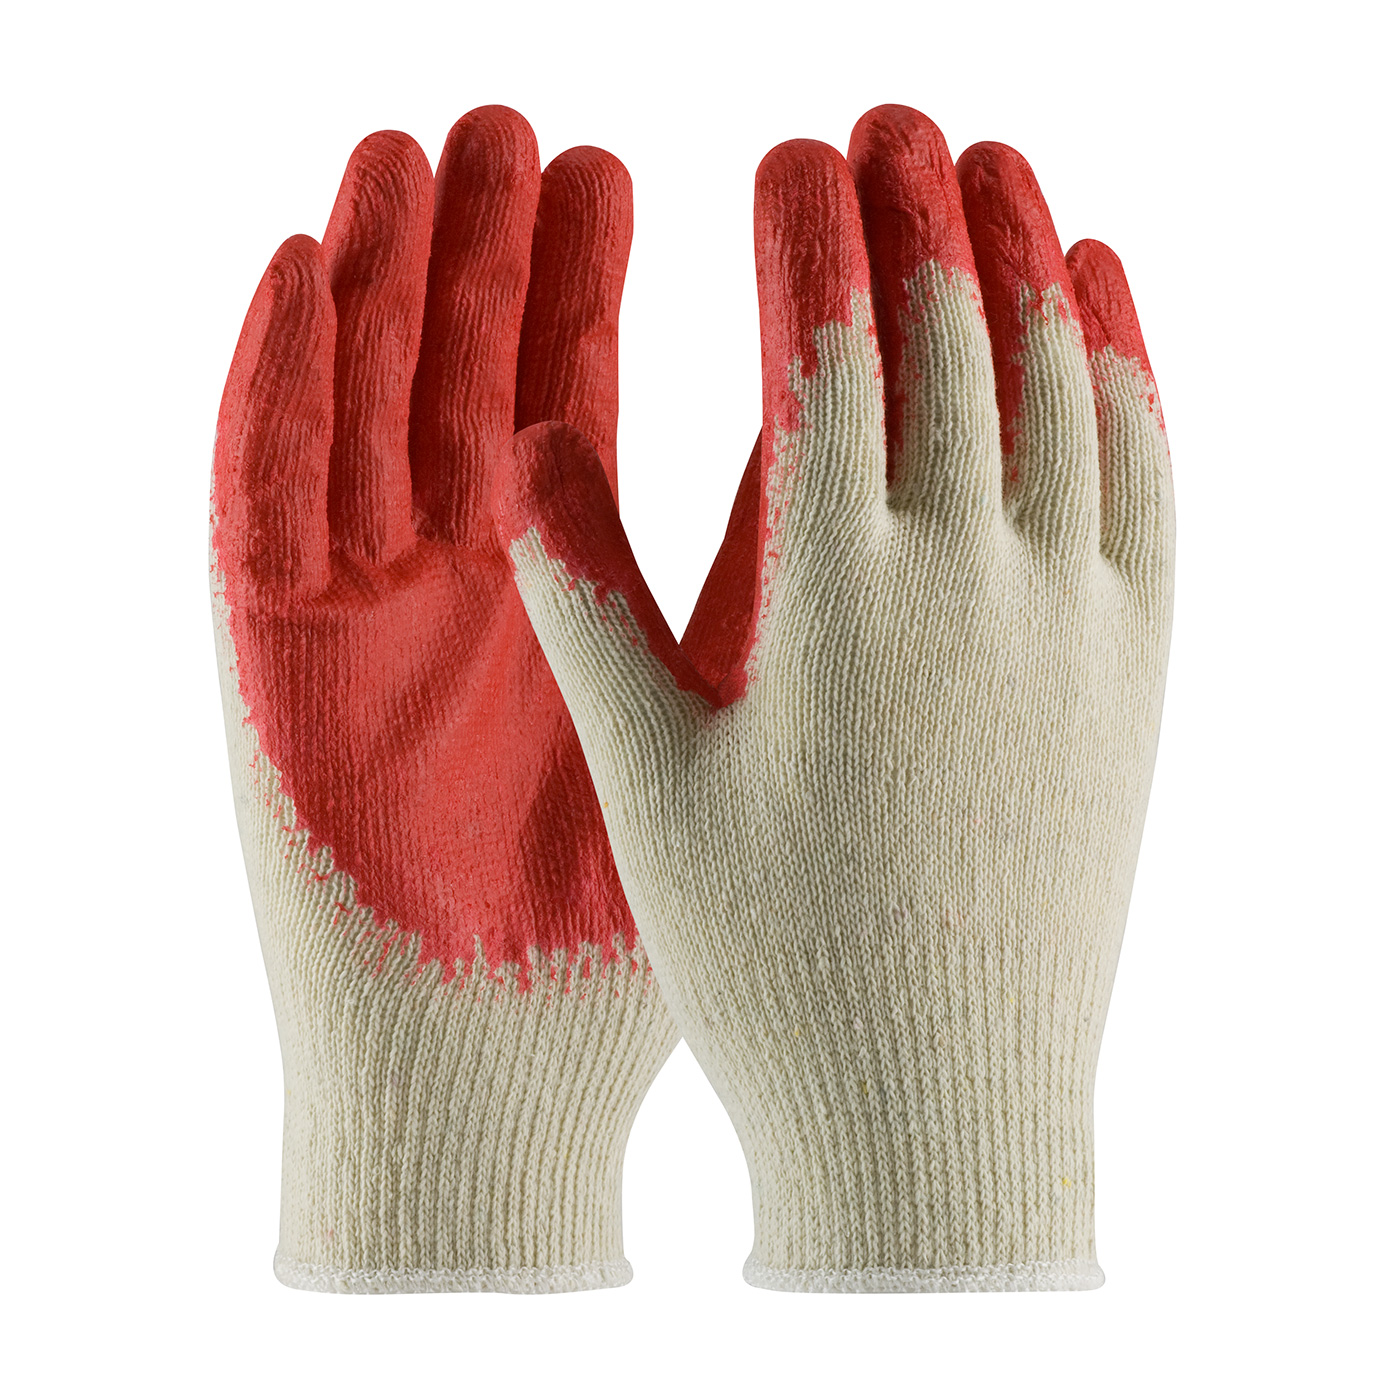 PIP 39-C121/L Seamless Knit Cotton/Polyester Glove with Latex Coated Smooth Grip on Palm & Fingers - Economy Grade - Large PID-39 C121 L